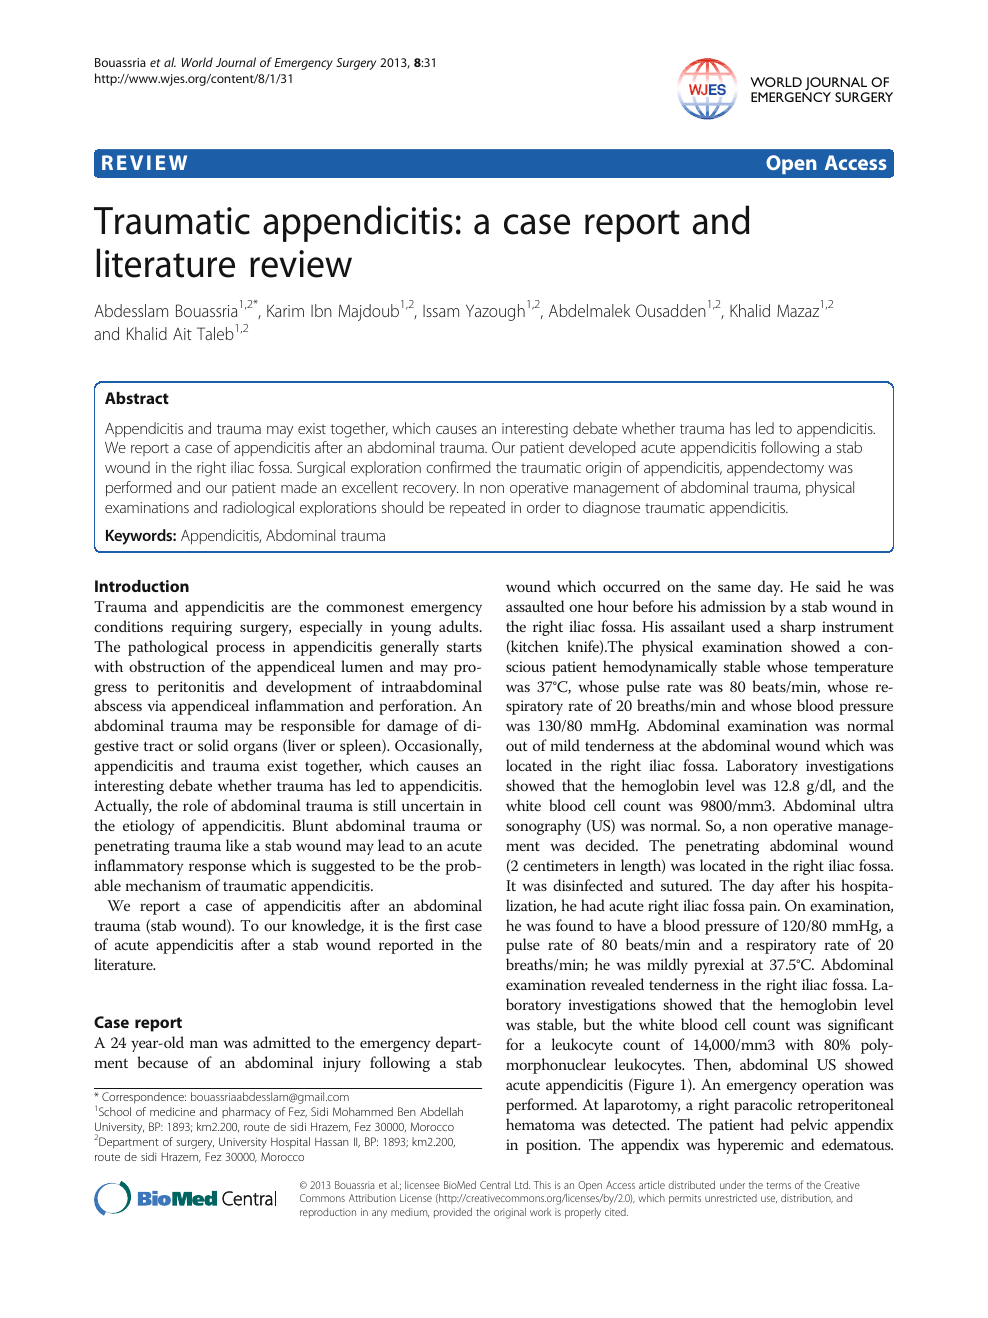 Traumatic appendicitis: a case report and literature review